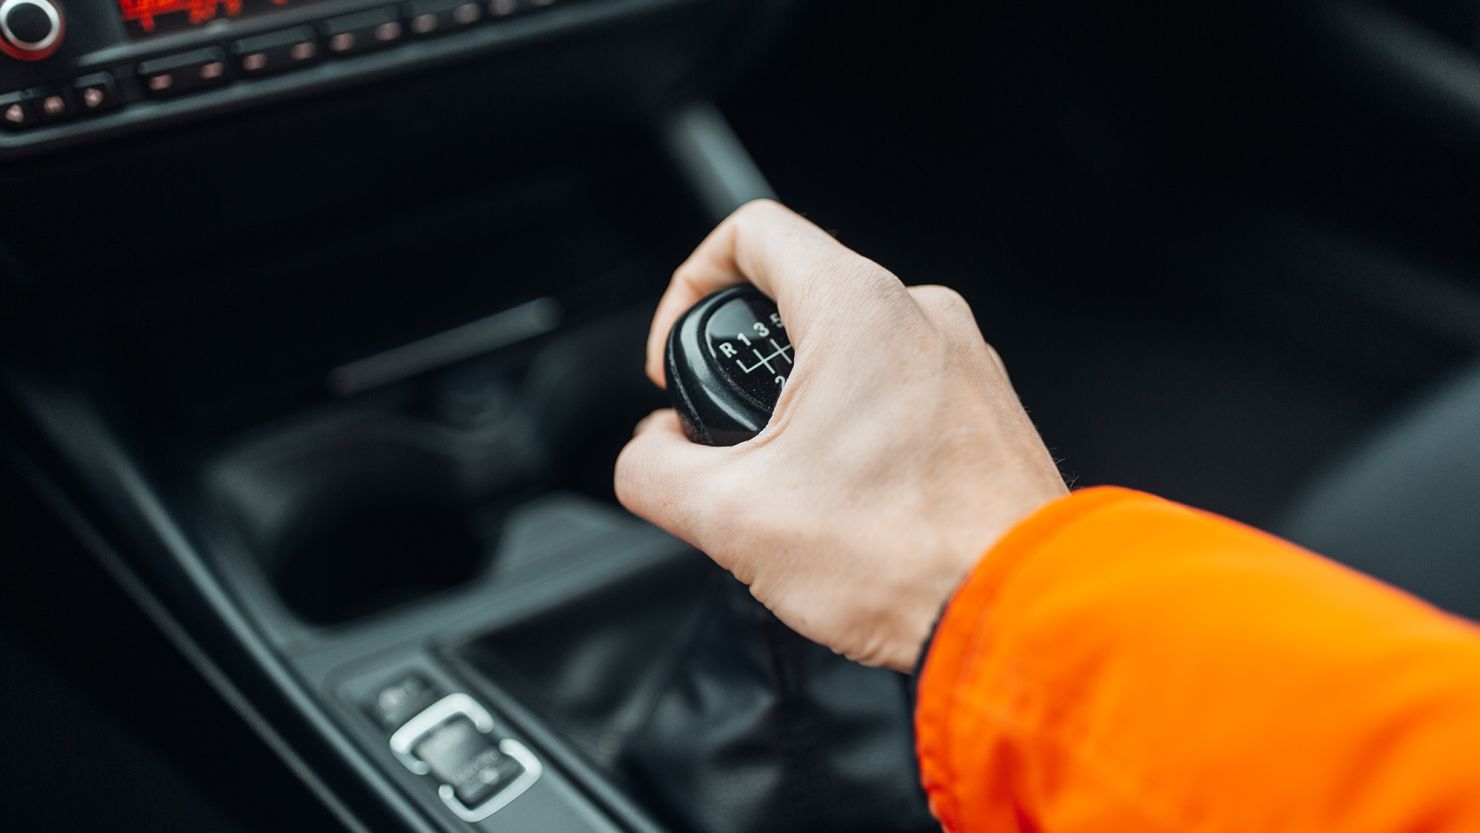 With car manufacturers increasingly shifting to electric, the days of manual transmission are numbered.